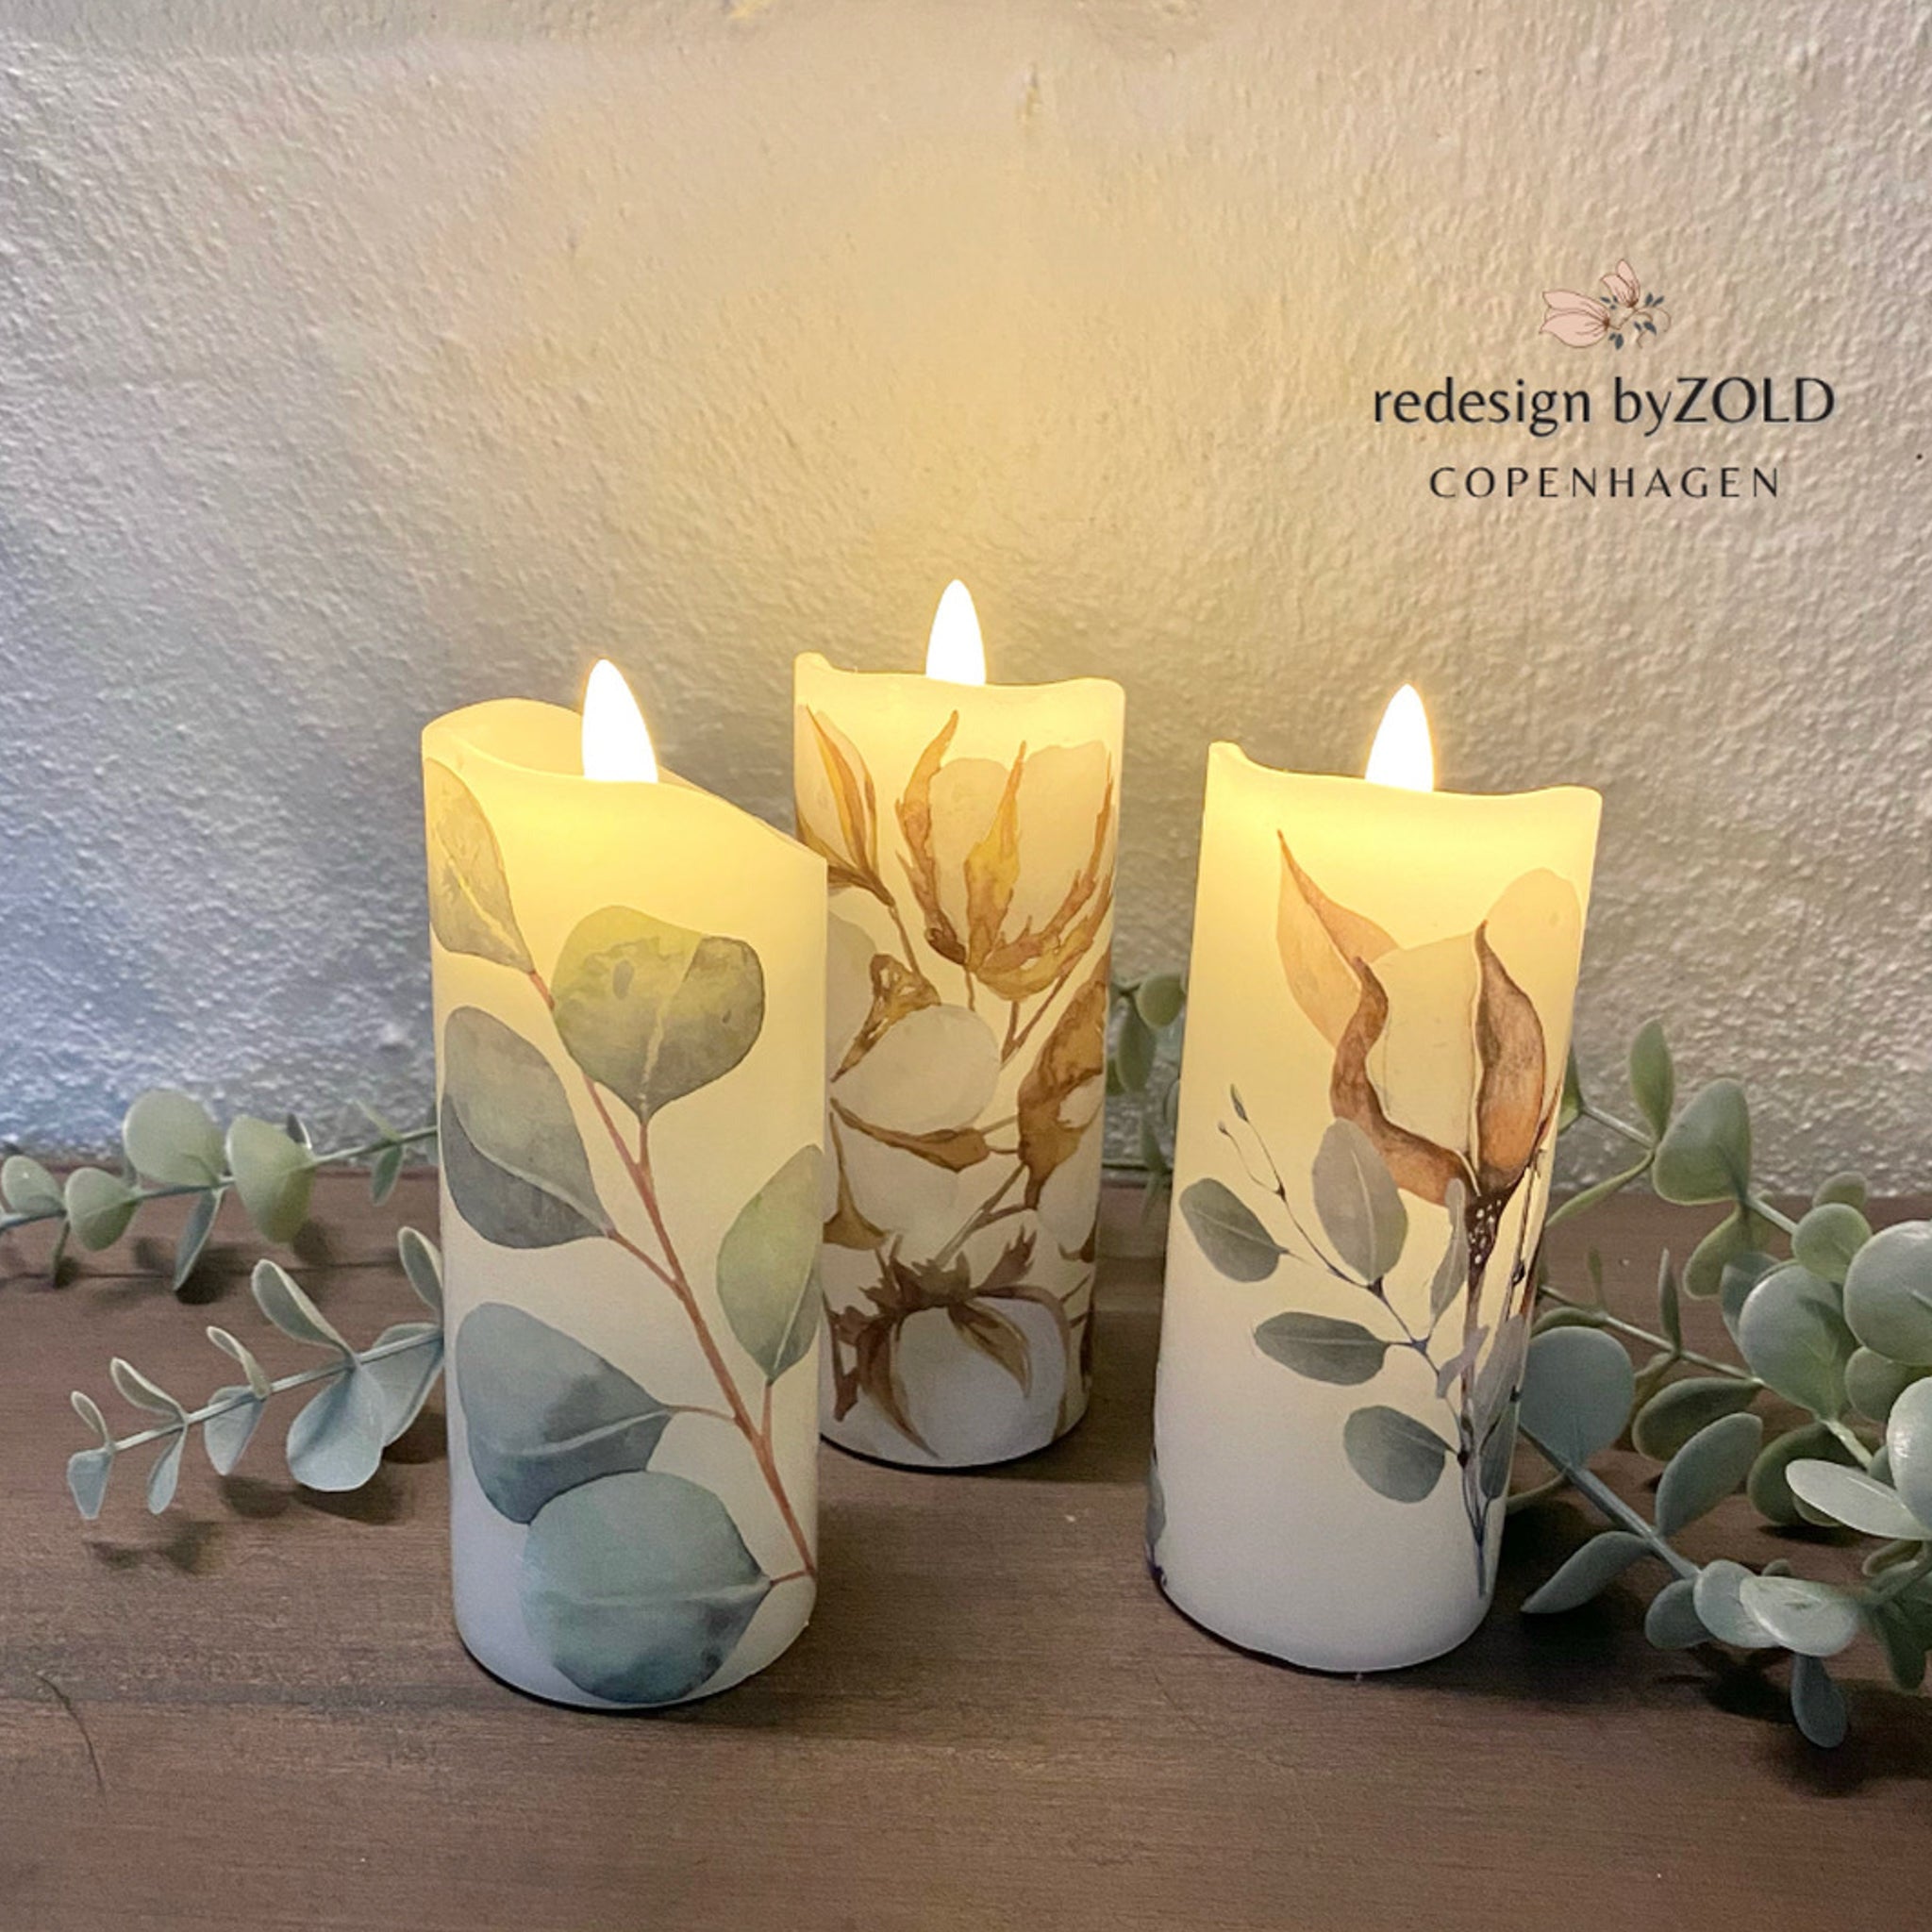 Three battery operated white candles refurbished by Redesign by Zold Copenhagen feature the Cotton and Eucalyptus furniture transfer.